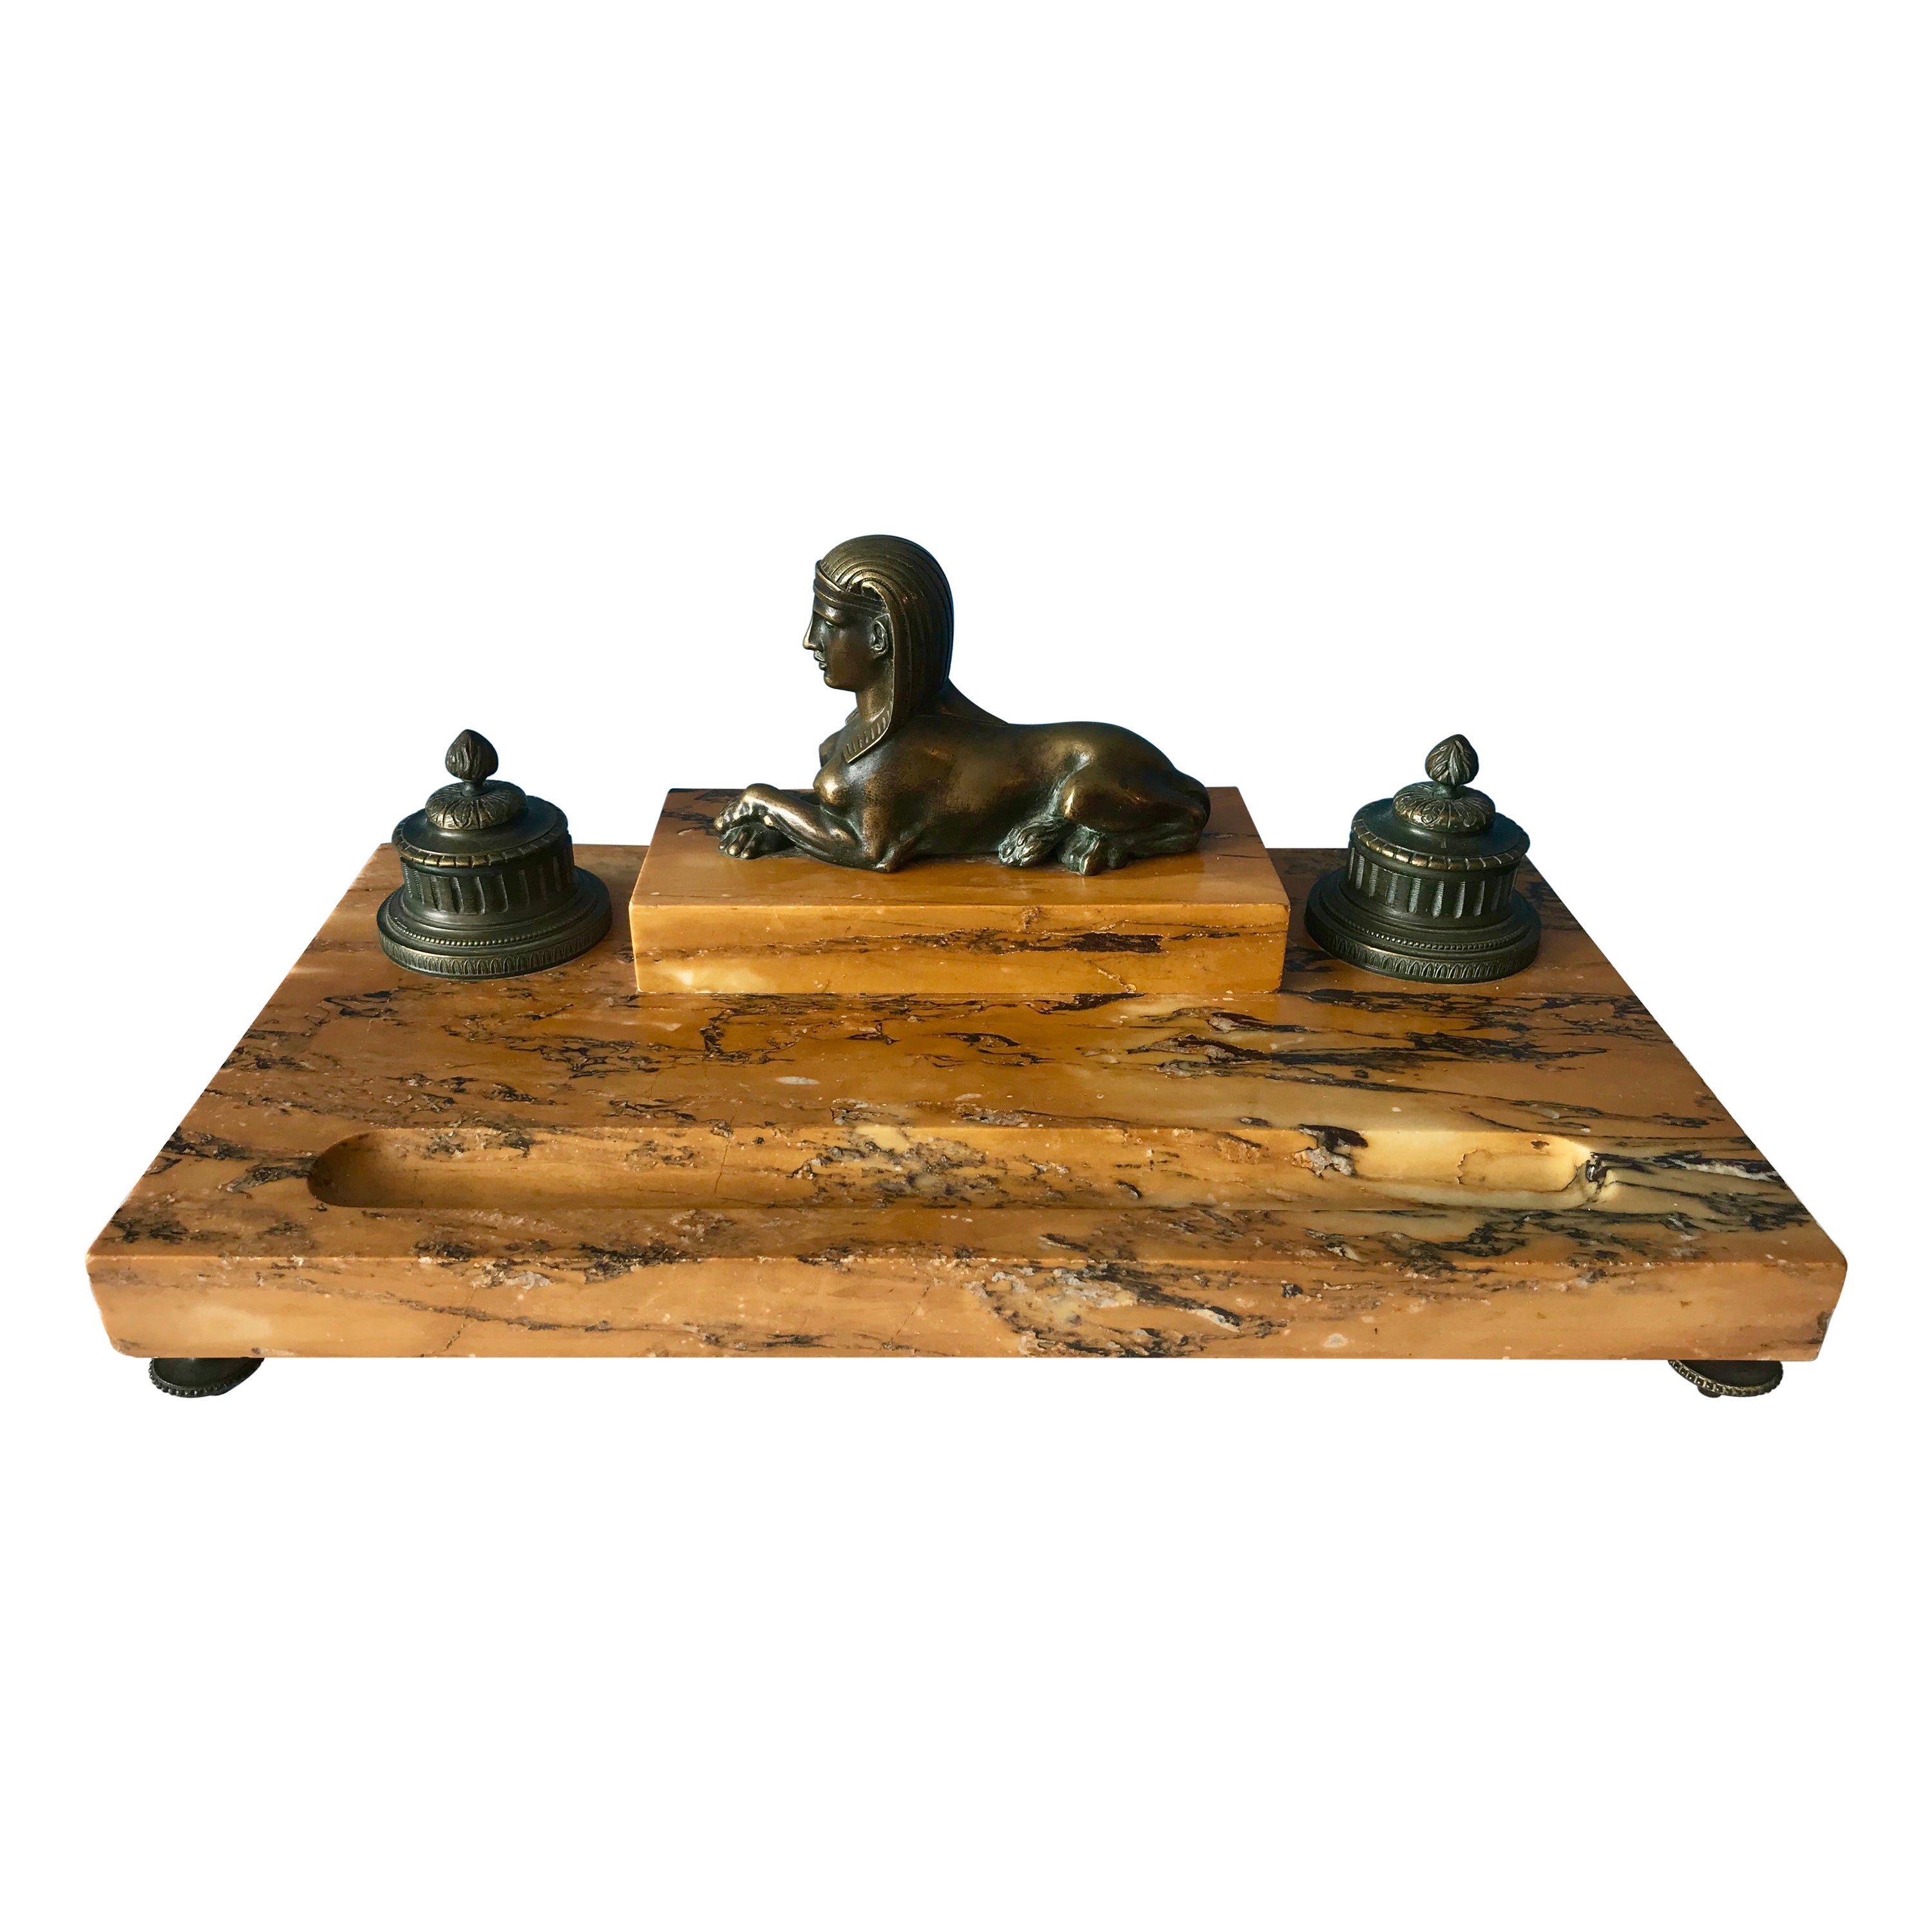 19th Century Egyptian Revival Sienna Marble Inkstand